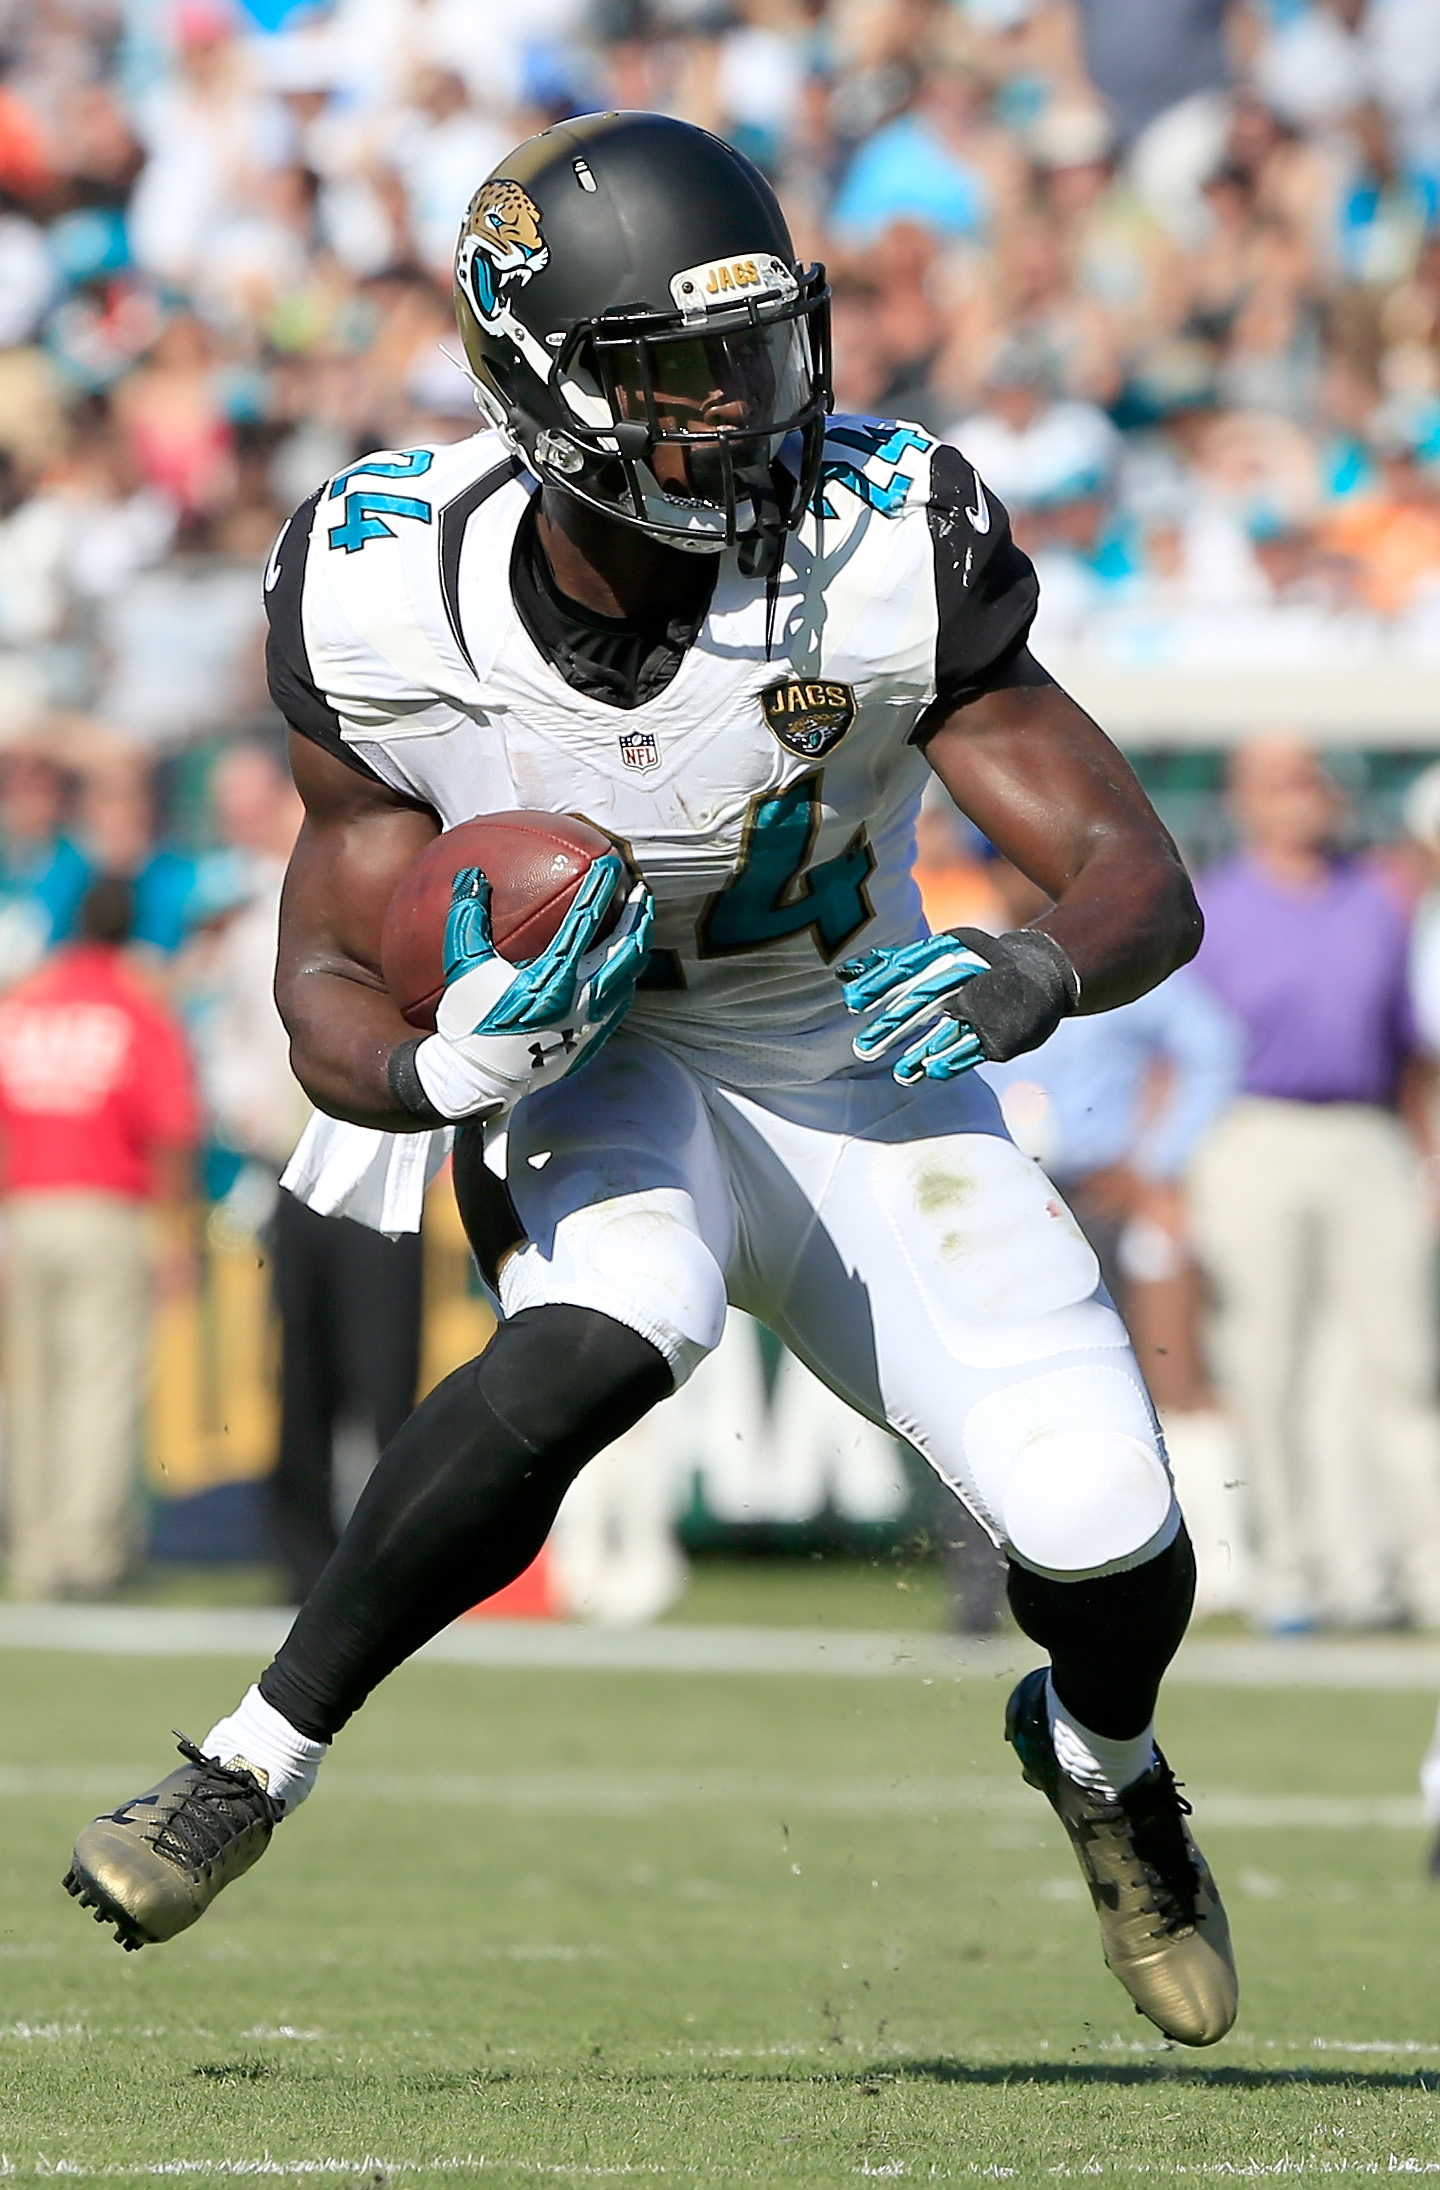 T.J. Yeldon finished with 80 yards on 25 carries in Jacksonville's first win of the season (Getty).